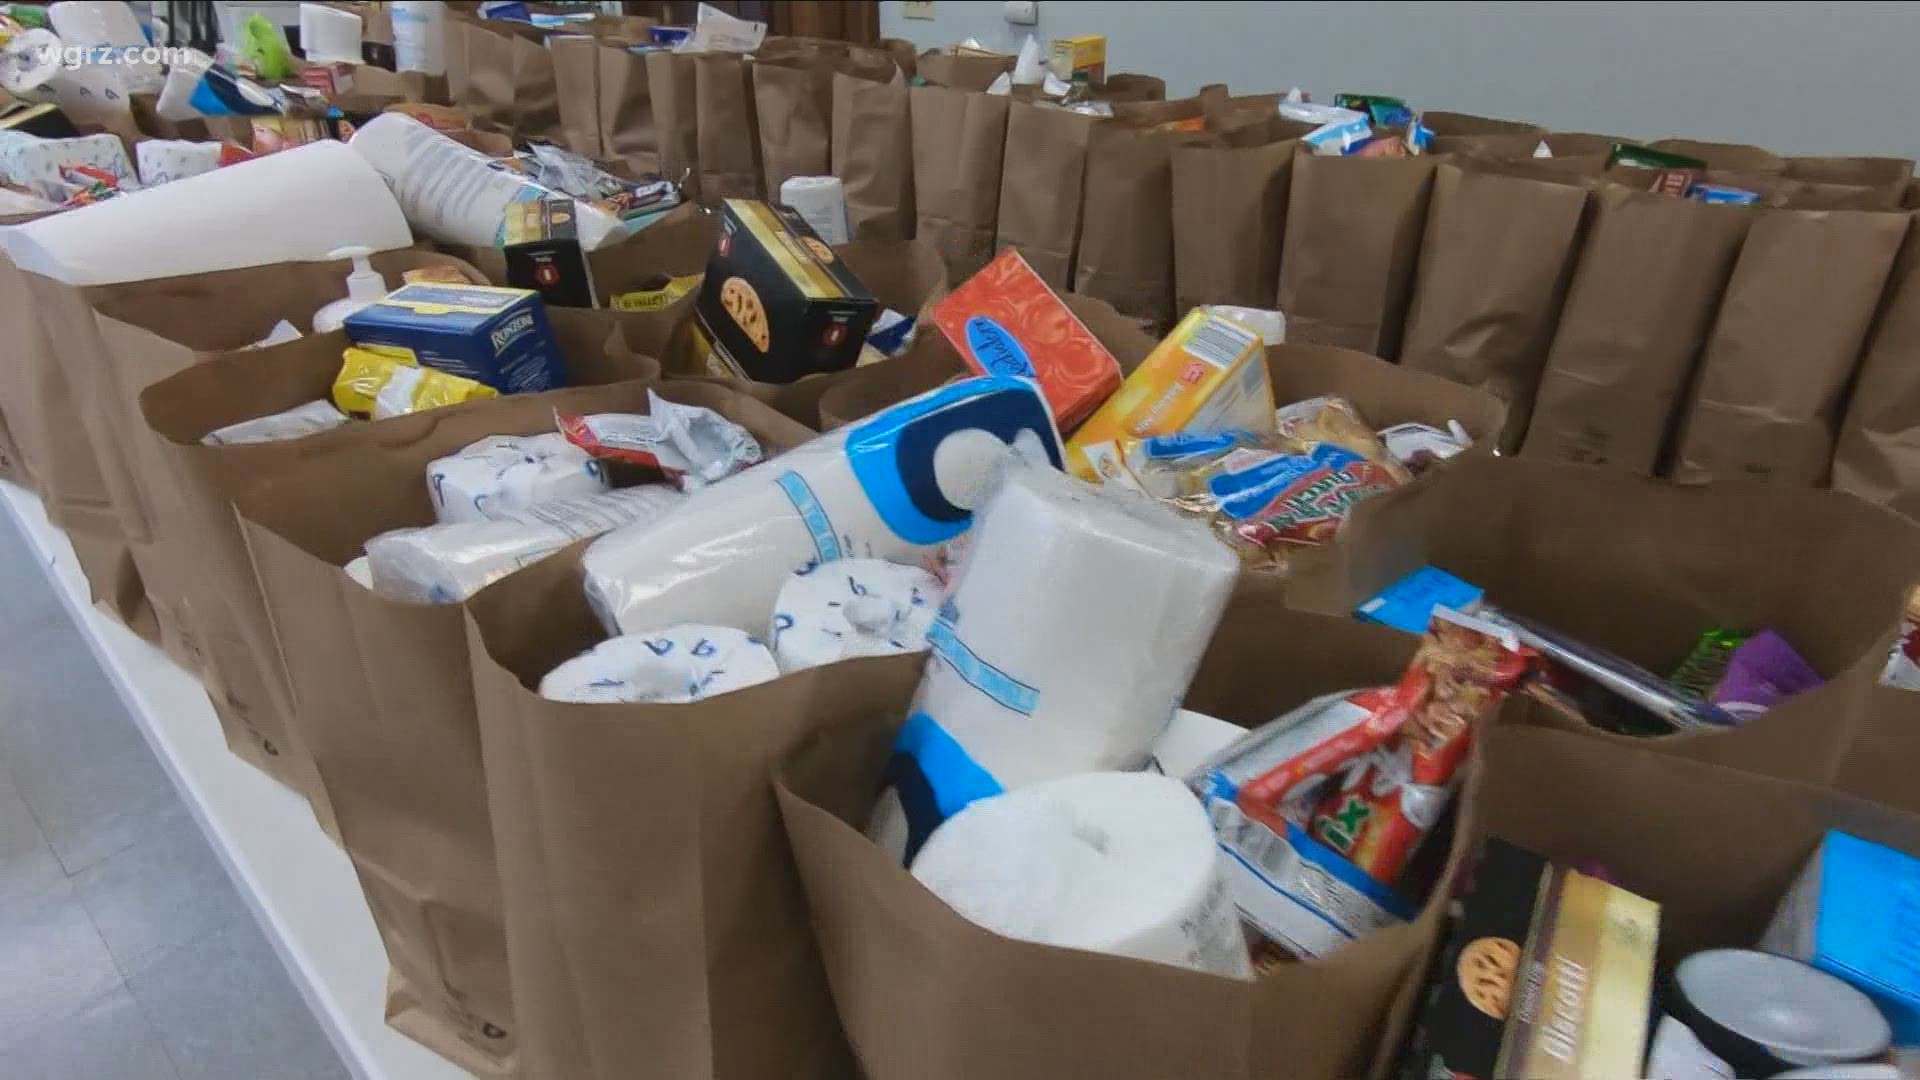 The Trinity Pantry in Lancaster and the Tri-Community Pantry in Depew both collected food Saturday during the 'Stock the Pantry' event.